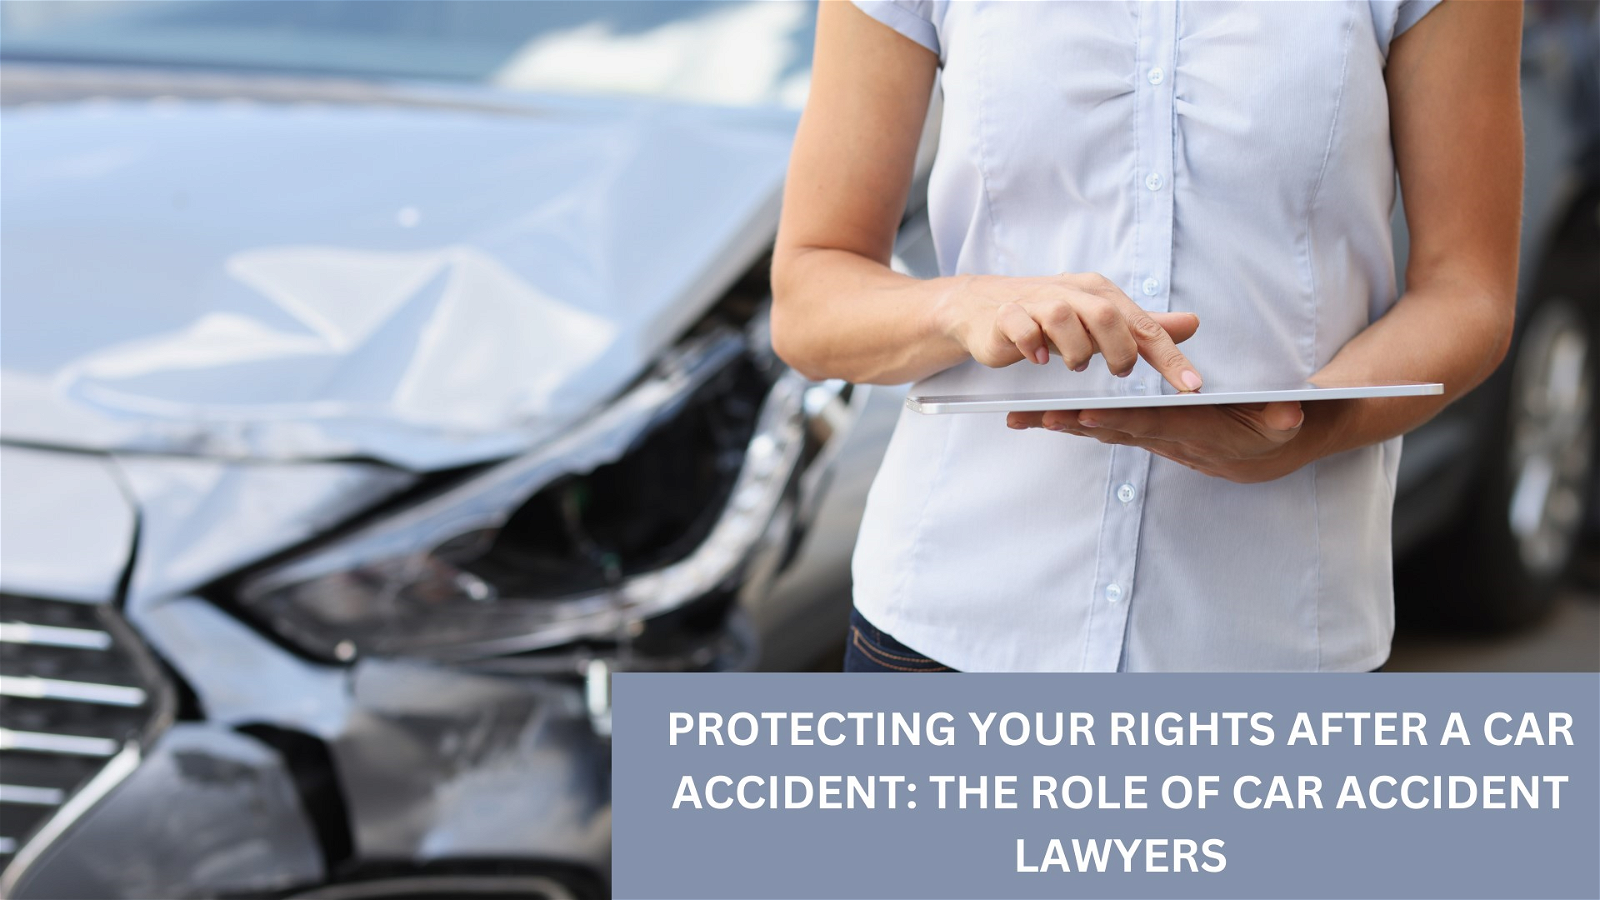 Role of Car Accident Lawyers